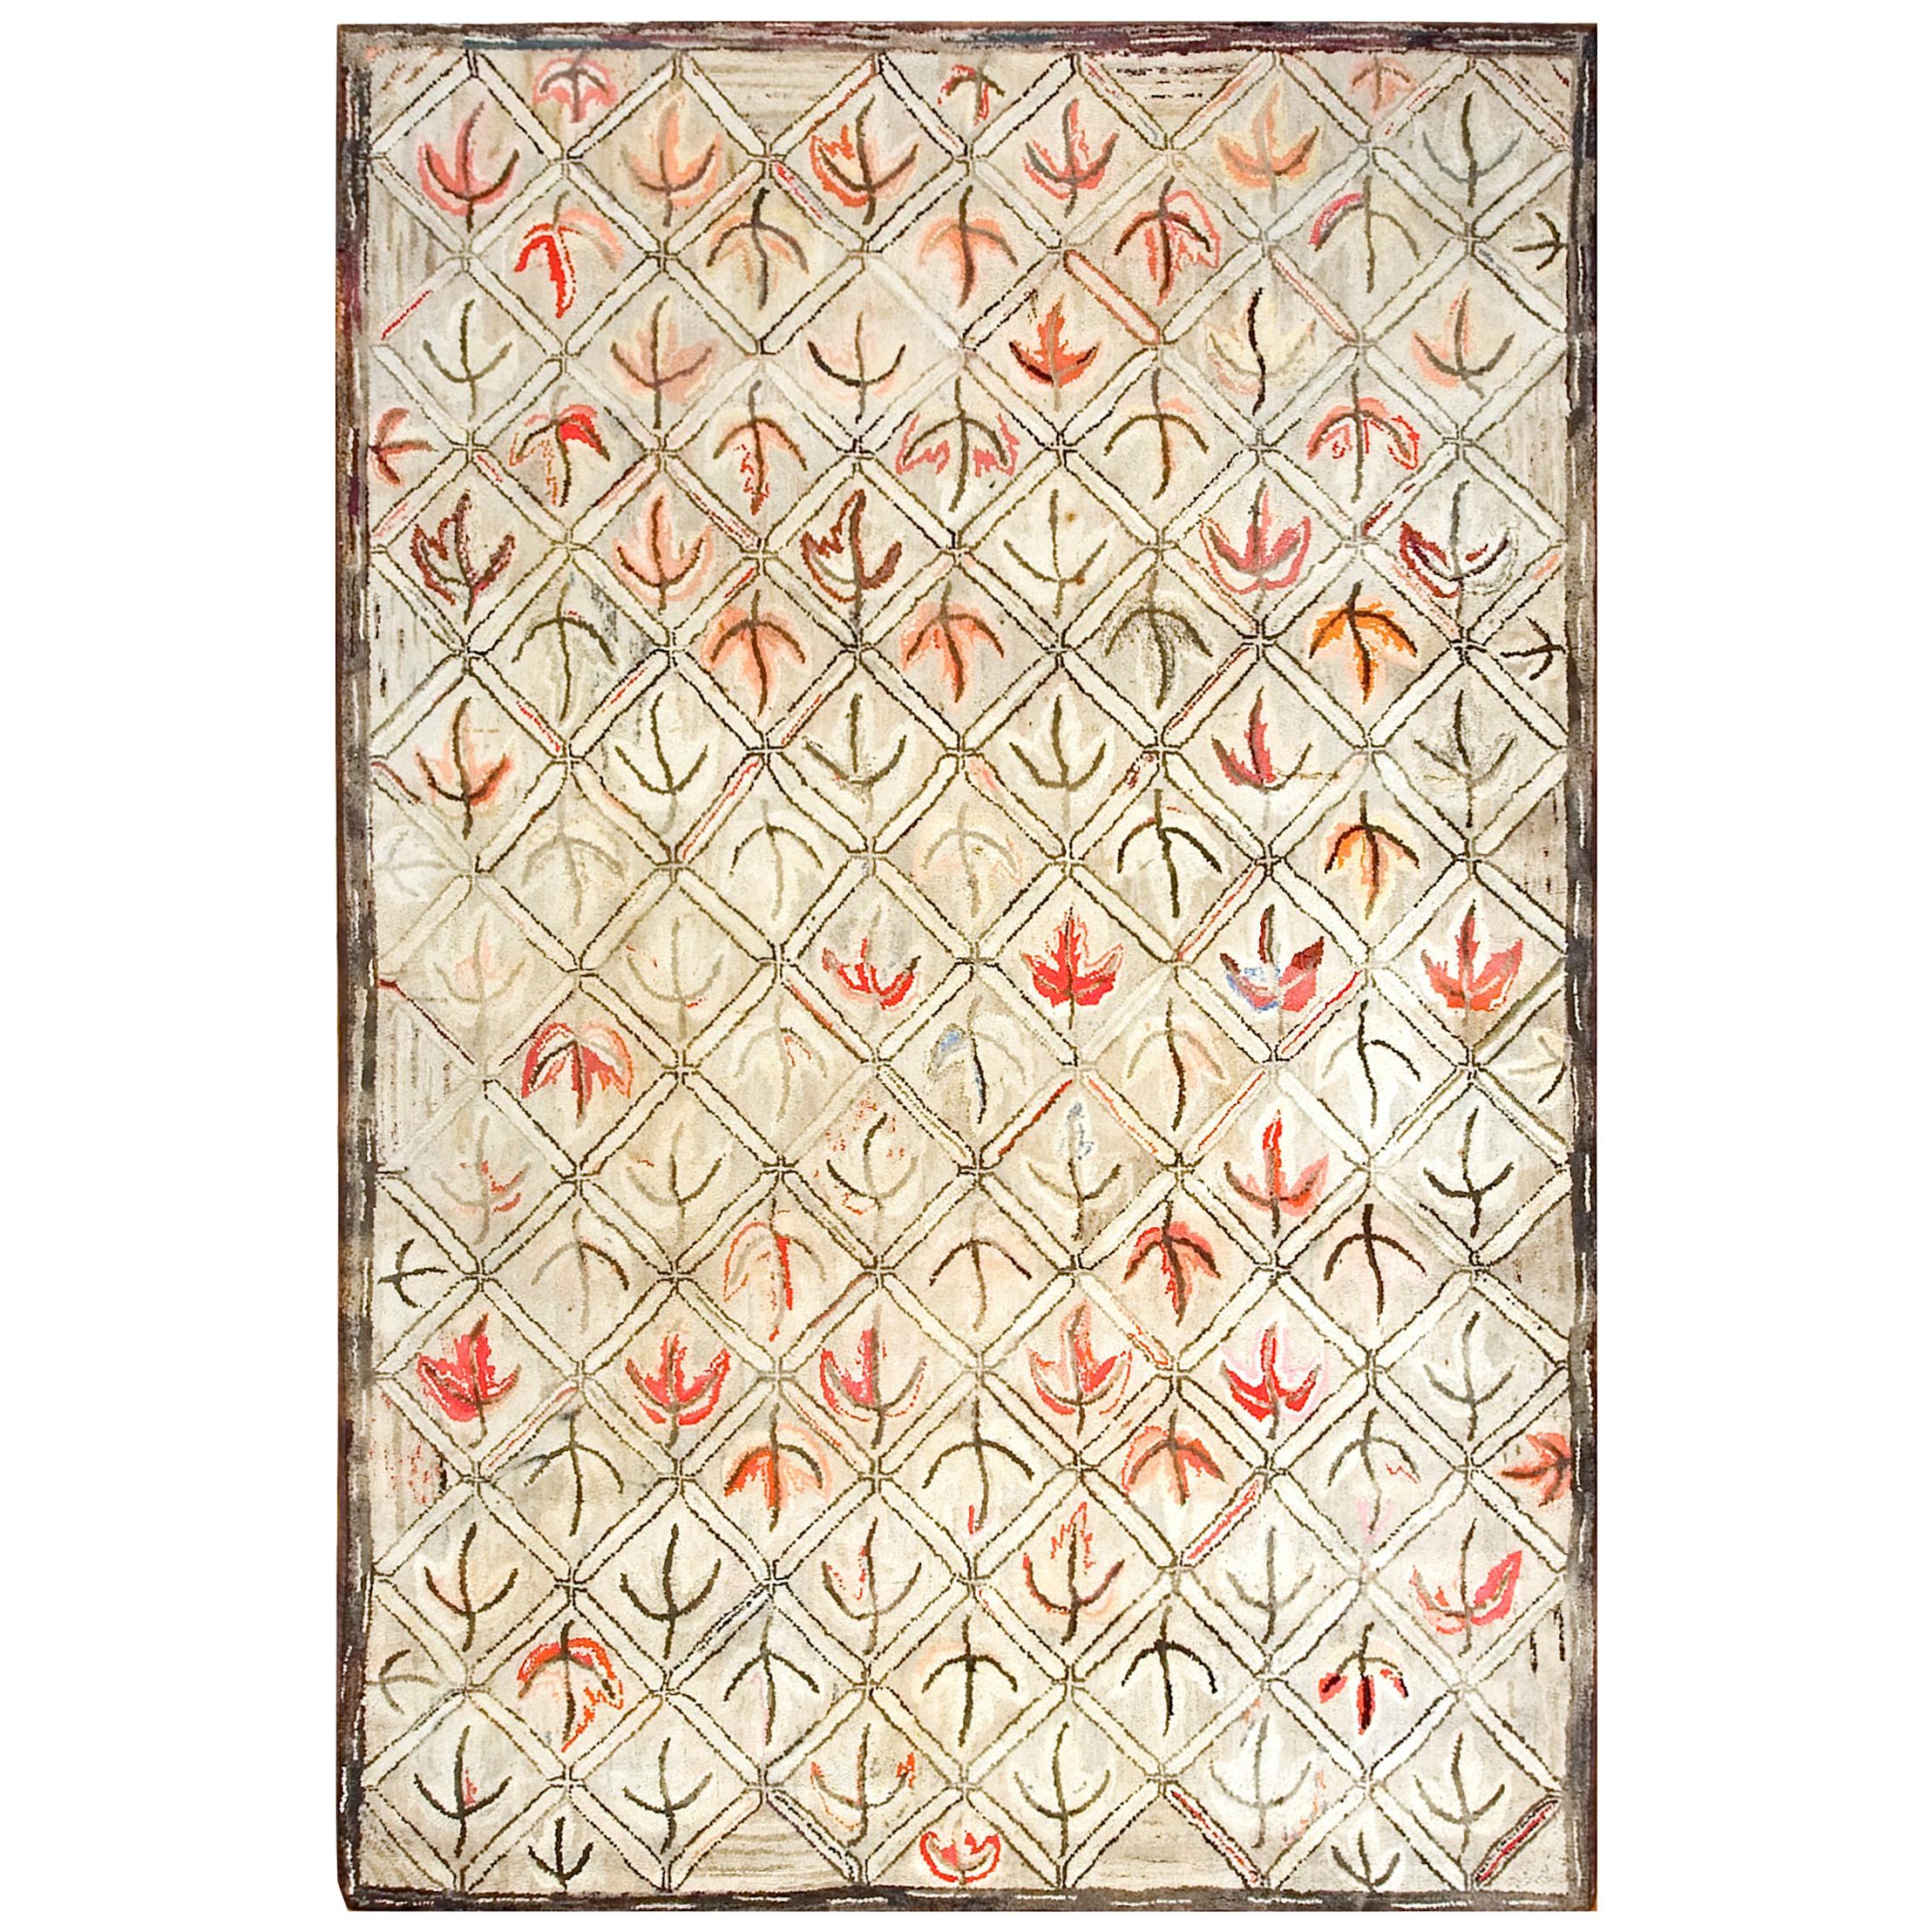 Early 20th Century American Hooked Rug ( 6' x 9' - 183  275 )